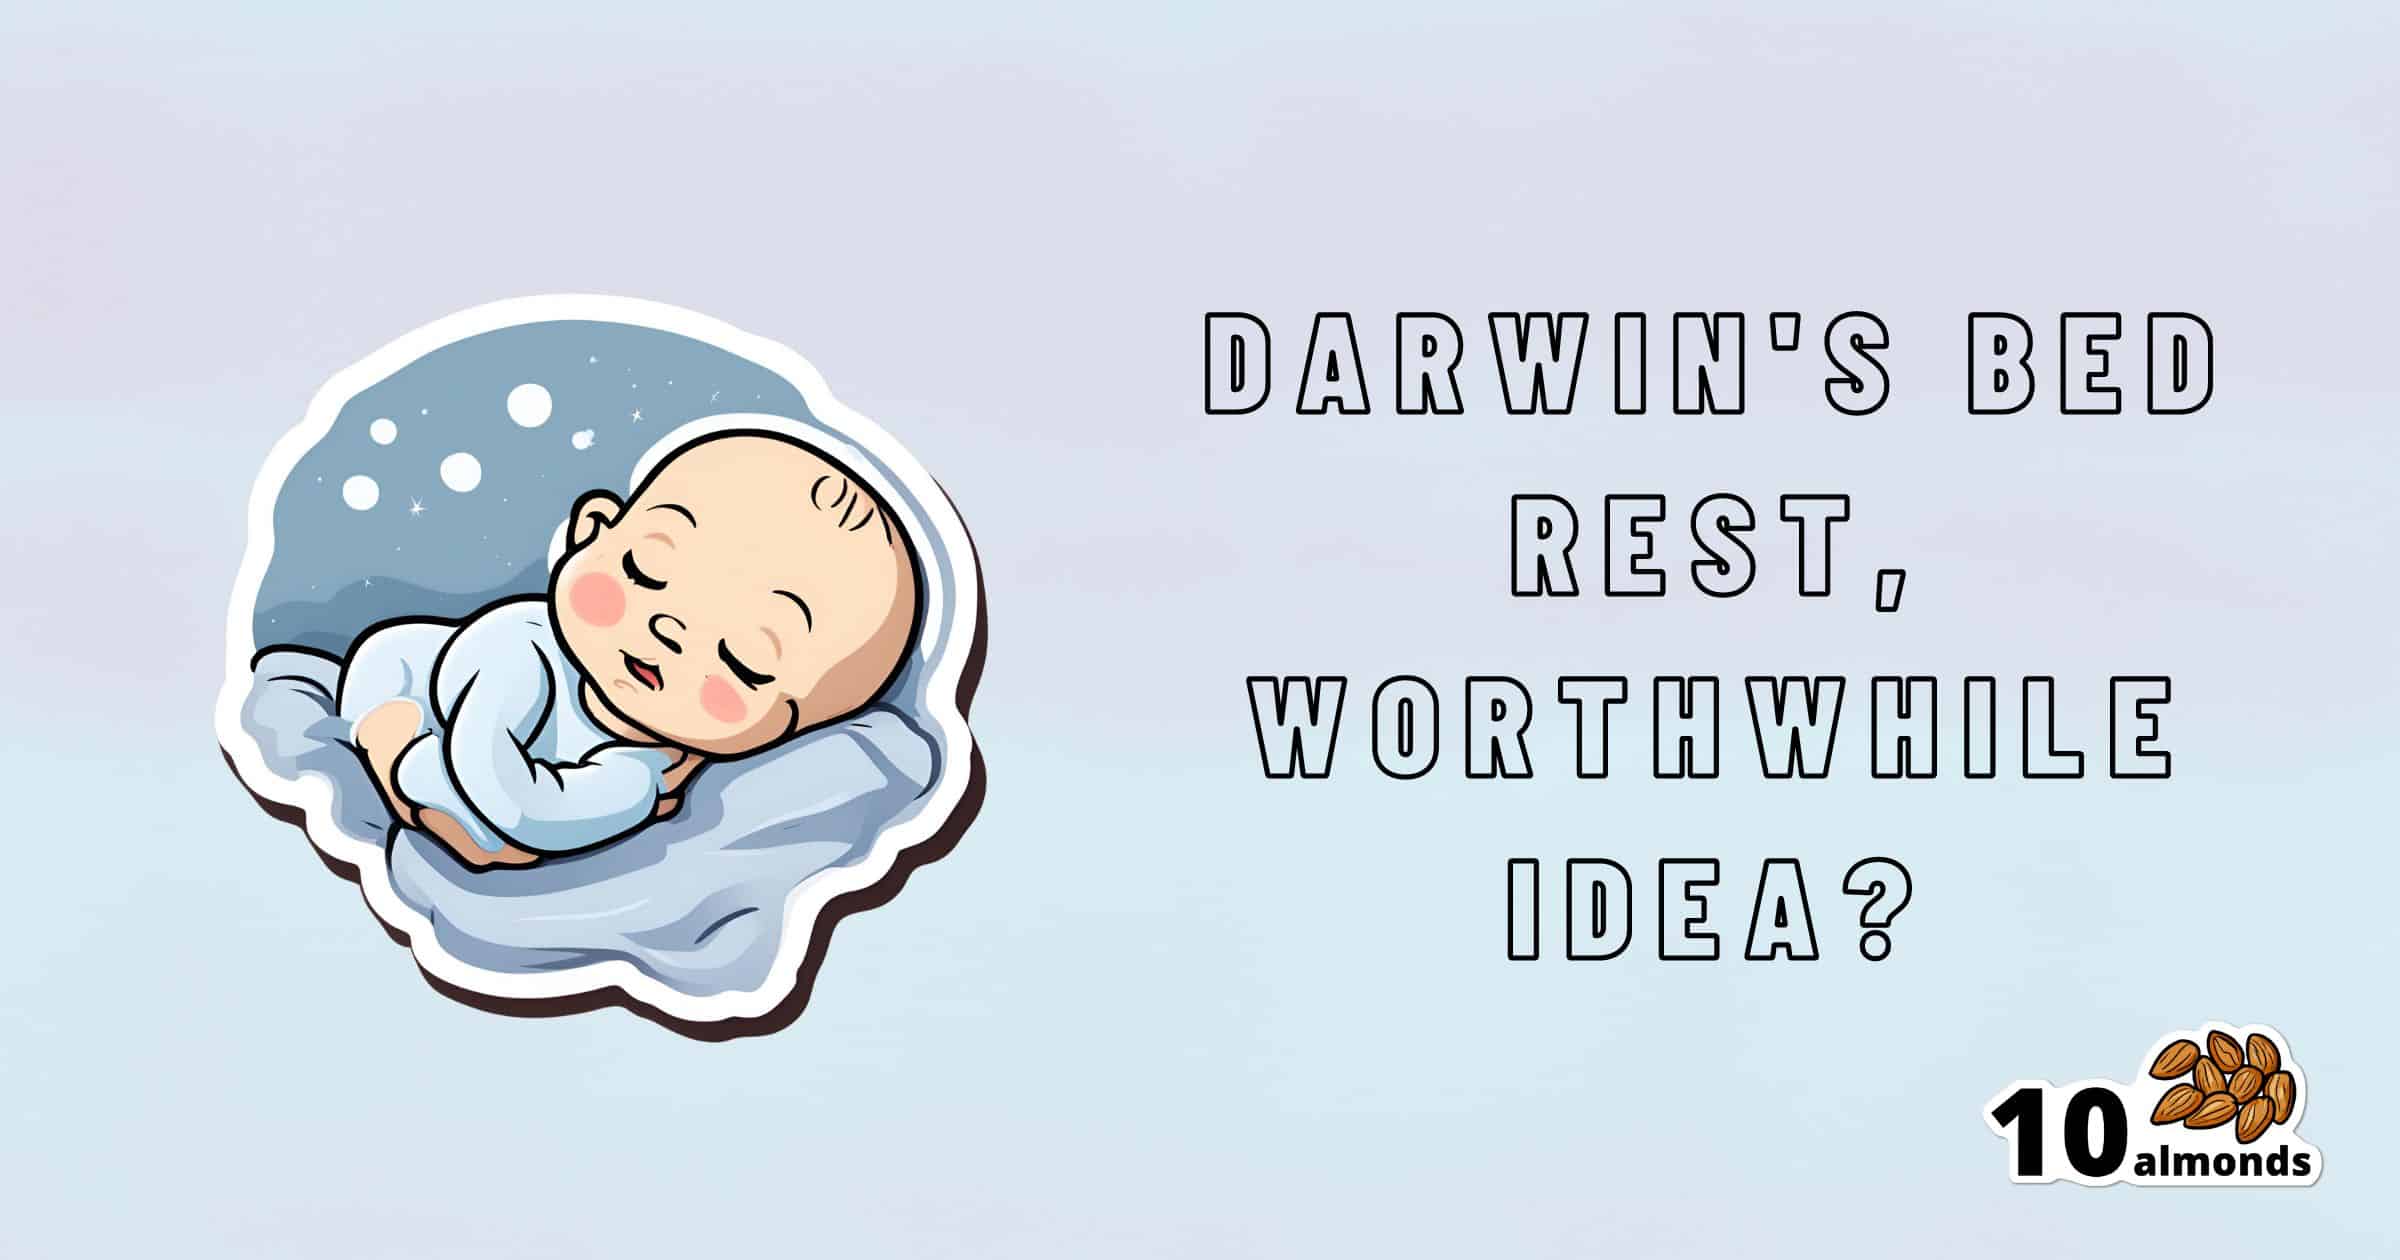 Illustration of a sleeping baby resting on a pillow with the text "Darwin's Bed Rest: A Worthwhile Idea?" on the right side. A small logo showing 10 almonds is at the bottom right corner. The background is light blue.